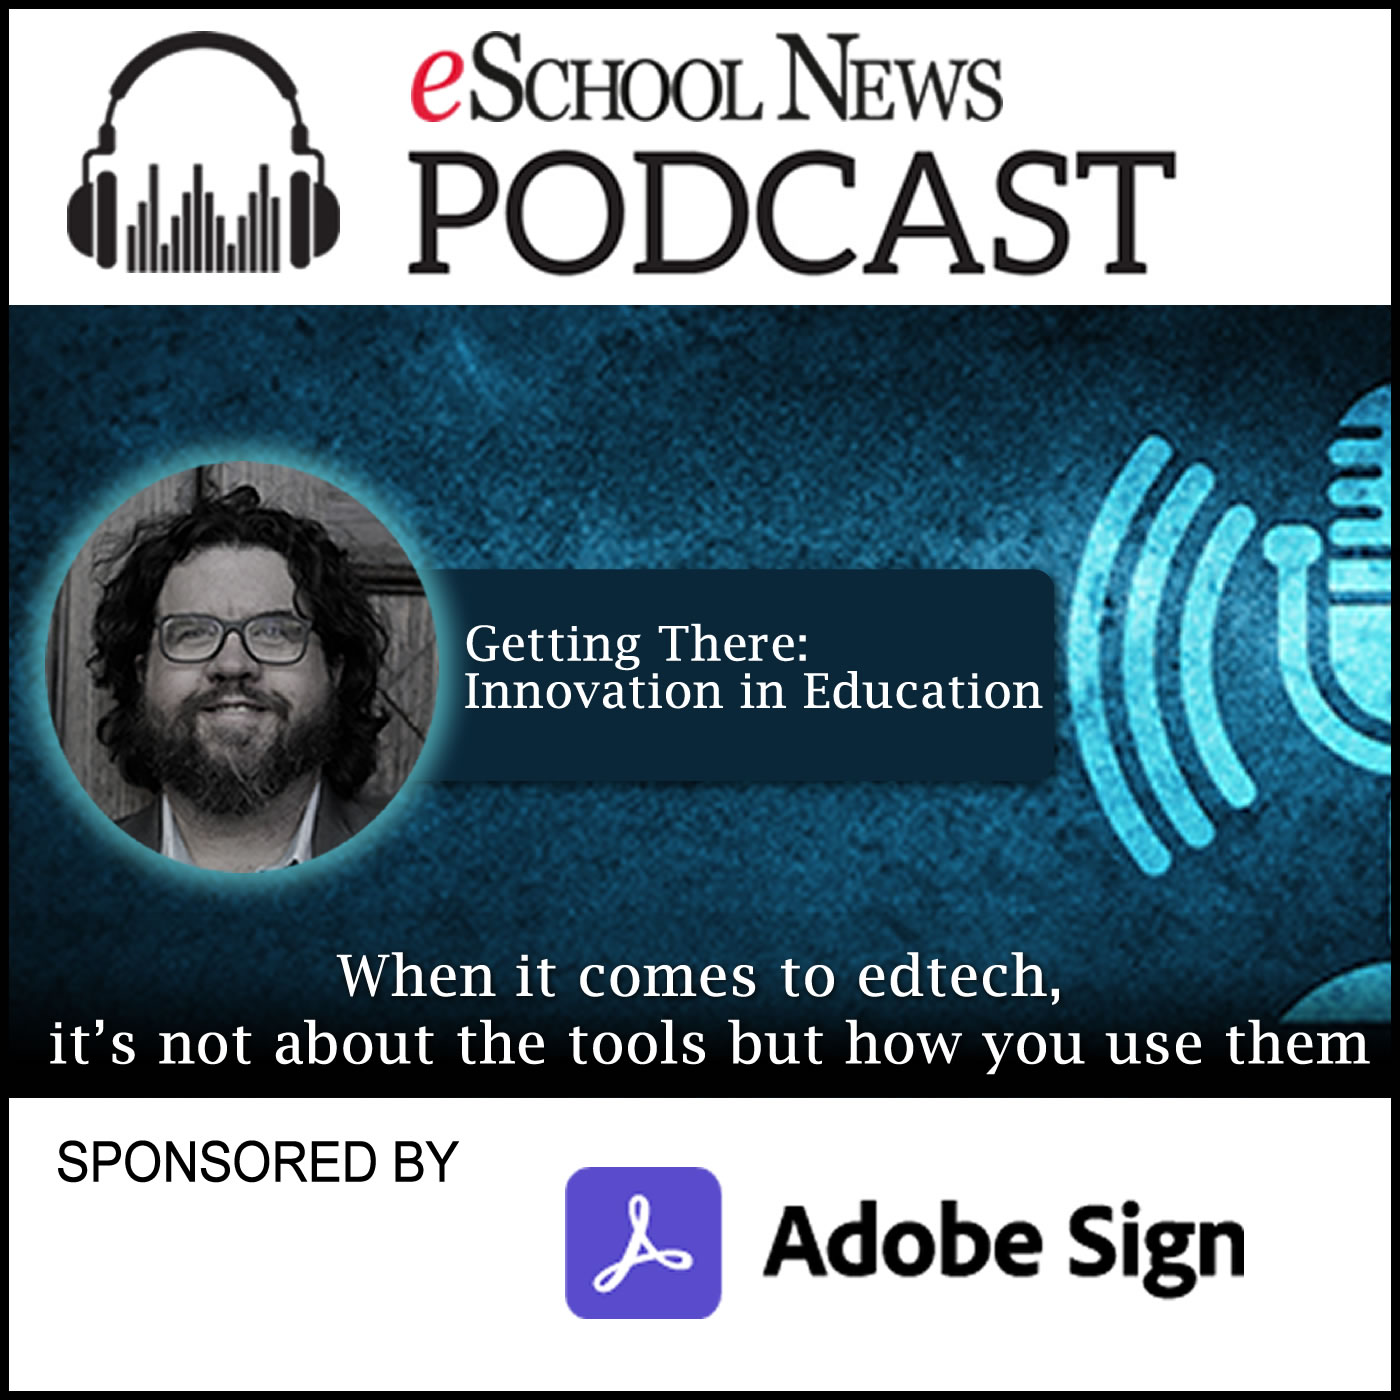 When it comes to edtech, it's not about the tools but how you use them